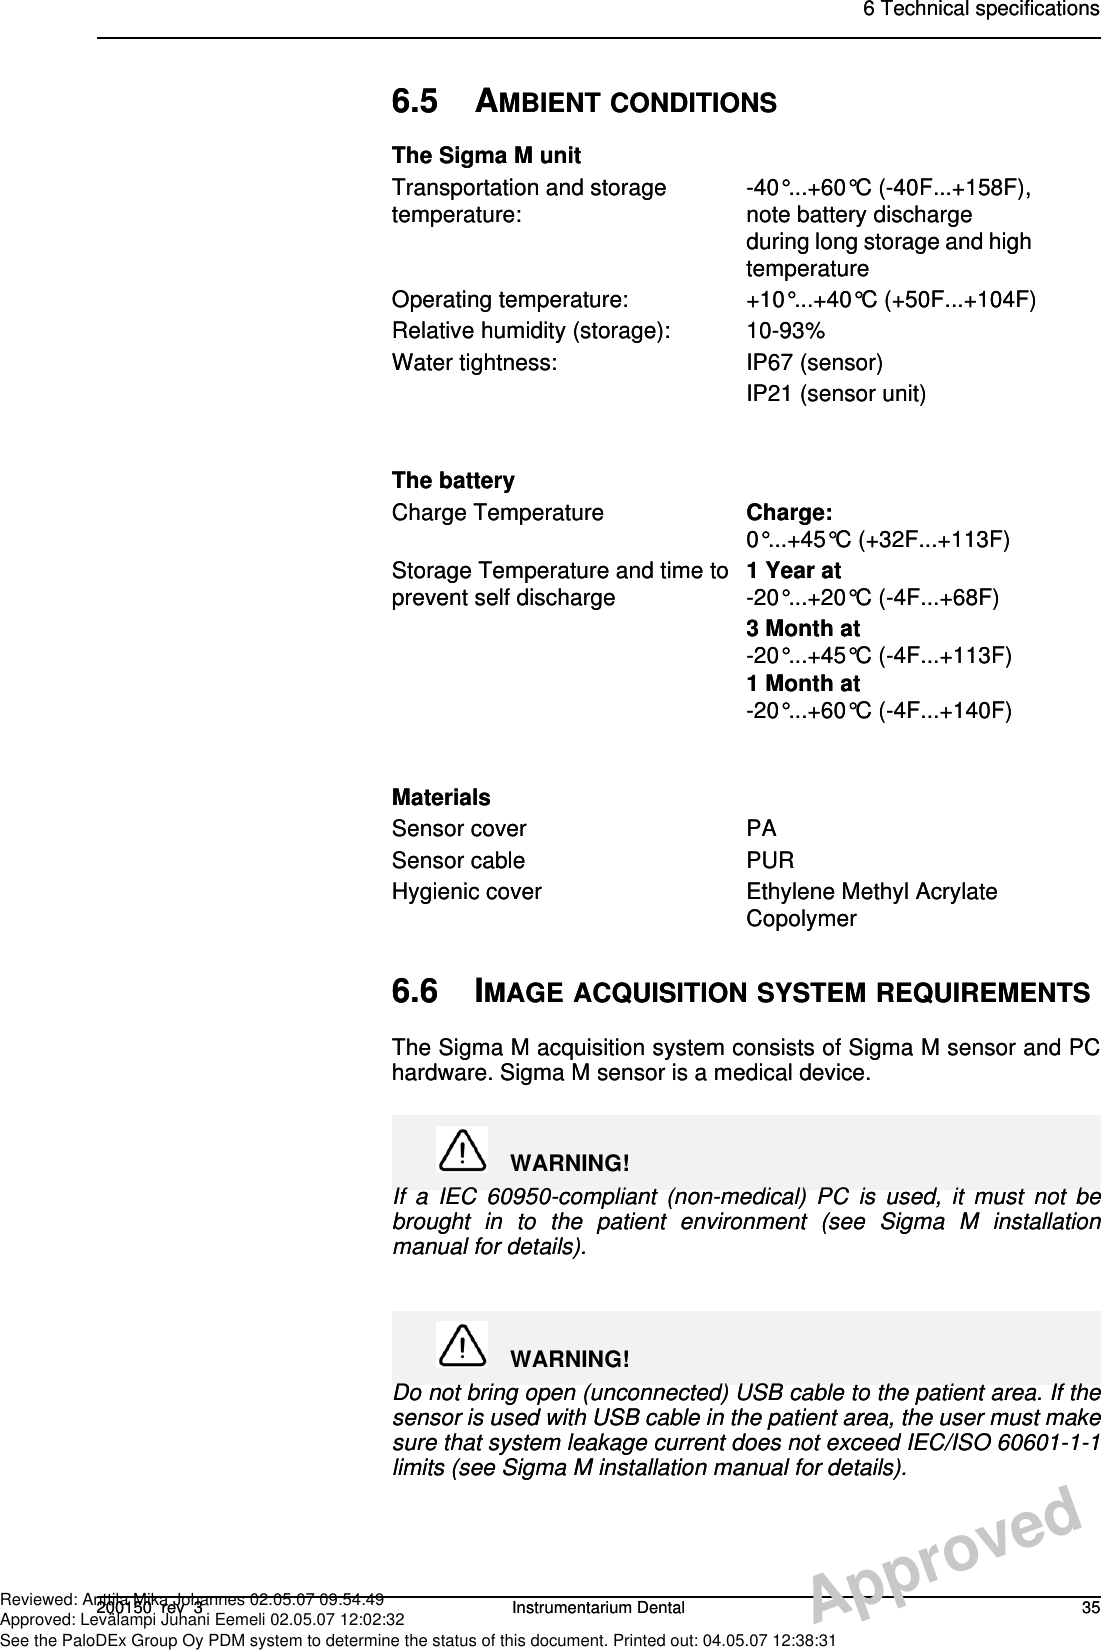 6 Technical specifications200150  rev  3 Instrumentarium Dental 356.6 IMAGE ACQUISITION SYSTEM REQUIREMENTSThe Sigma M acquisition system consists of Sigma M sensor and PChardware. Sigma M sensor is a medical device.WARNING!If a IEC 60950-compliant (non-medical) PC is used, it must not bebrought in to the patient environment (see Sigma M installationmanual for details).WARNING!Do not bring open (unconnected) USB cable to the patient area. If thesensor is used with USB cable in the patient area, the user must makesure that system leakage current does not exceed IEC/ISO 60601-1-1limits (see Sigma M installation manual for details).6.5 AMBIENT CONDITIONSThe Sigma M unitTransportation and storage temperature: -40°...+60°C (-40F...+158F), note battery discharge during long storage and high temperatureOperating temperature: +10°...+40°C (+50F...+104F)Relative humidity (storage): 10-93%Water tightness: IP67 (sensor)IP21 (sensor unit)The batteryCharge Temperature Charge: 0°...+45°C (+32F...+113F)Storage Temperature and time to prevent self discharge 1 Year at-20°...+20°C (-4F...+68F)3 Month at-20°...+45°C (-4F...+113F) 1 Month at-20°...+60°C (-4F...+140F)MaterialsSensor cover PASensor cable PURHygienic cover Ethylene Methyl Acrylate Copolymer6 Technical specifications200150  rev  3 Instrumentarium Dental 356.6 IMAGE ACQUISITION SYSTEM REQUIREMENTSThe Sigma M acquisition system consists of Sigma M sensor and PChardware. Sigma M sensor is a medical device.WARNING!If a IEC 60950-compliant (non-medical) PC is used, it must not bebrought in to the patient environment (see Sigma M installationmanual for details).WARNING!Do not bring open (unconnected) USB cable to the patient area. If thesensor is used with USB cable in the patient area, the user must makesure that system leakage current does not exceed IEC/ISO 60601-1-1limits (see Sigma M installation manual for details).6.5 AMBIENT CONDITIONSThe Sigma M unitTransportation and storage temperature: -40°...+60°C (-40F...+158F), note battery discharge during long storage and high temperatureOperating temperature: +10°...+40°C (+50F...+104F)Relative humidity (storage): 10-93%Water tightness: IP67 (sensor)IP21 (sensor unit)The batteryCharge Temperature Charge: 0°...+45°C (+32F...+113F)Storage Temperature and time to prevent self discharge 1 Year at-20°...+20°C (-4F...+68F)3 Month at-20°...+45°C (-4F...+113F) 1 Month at-20°...+60°C (-4F...+140F)MaterialsSensor cover PASensor cable PURHygienic cover Ethylene Methyl Acrylate CopolymerApprovedReviewed: Anttila Mika Johannes 02.05.07 09:54:49Approved: Levälampi Juhani Eemeli 02.05.07 12:02:32See the PaloDEx Group Oy PDM system to determine the status of this document. Printed out: 04.05.07 12:38:31